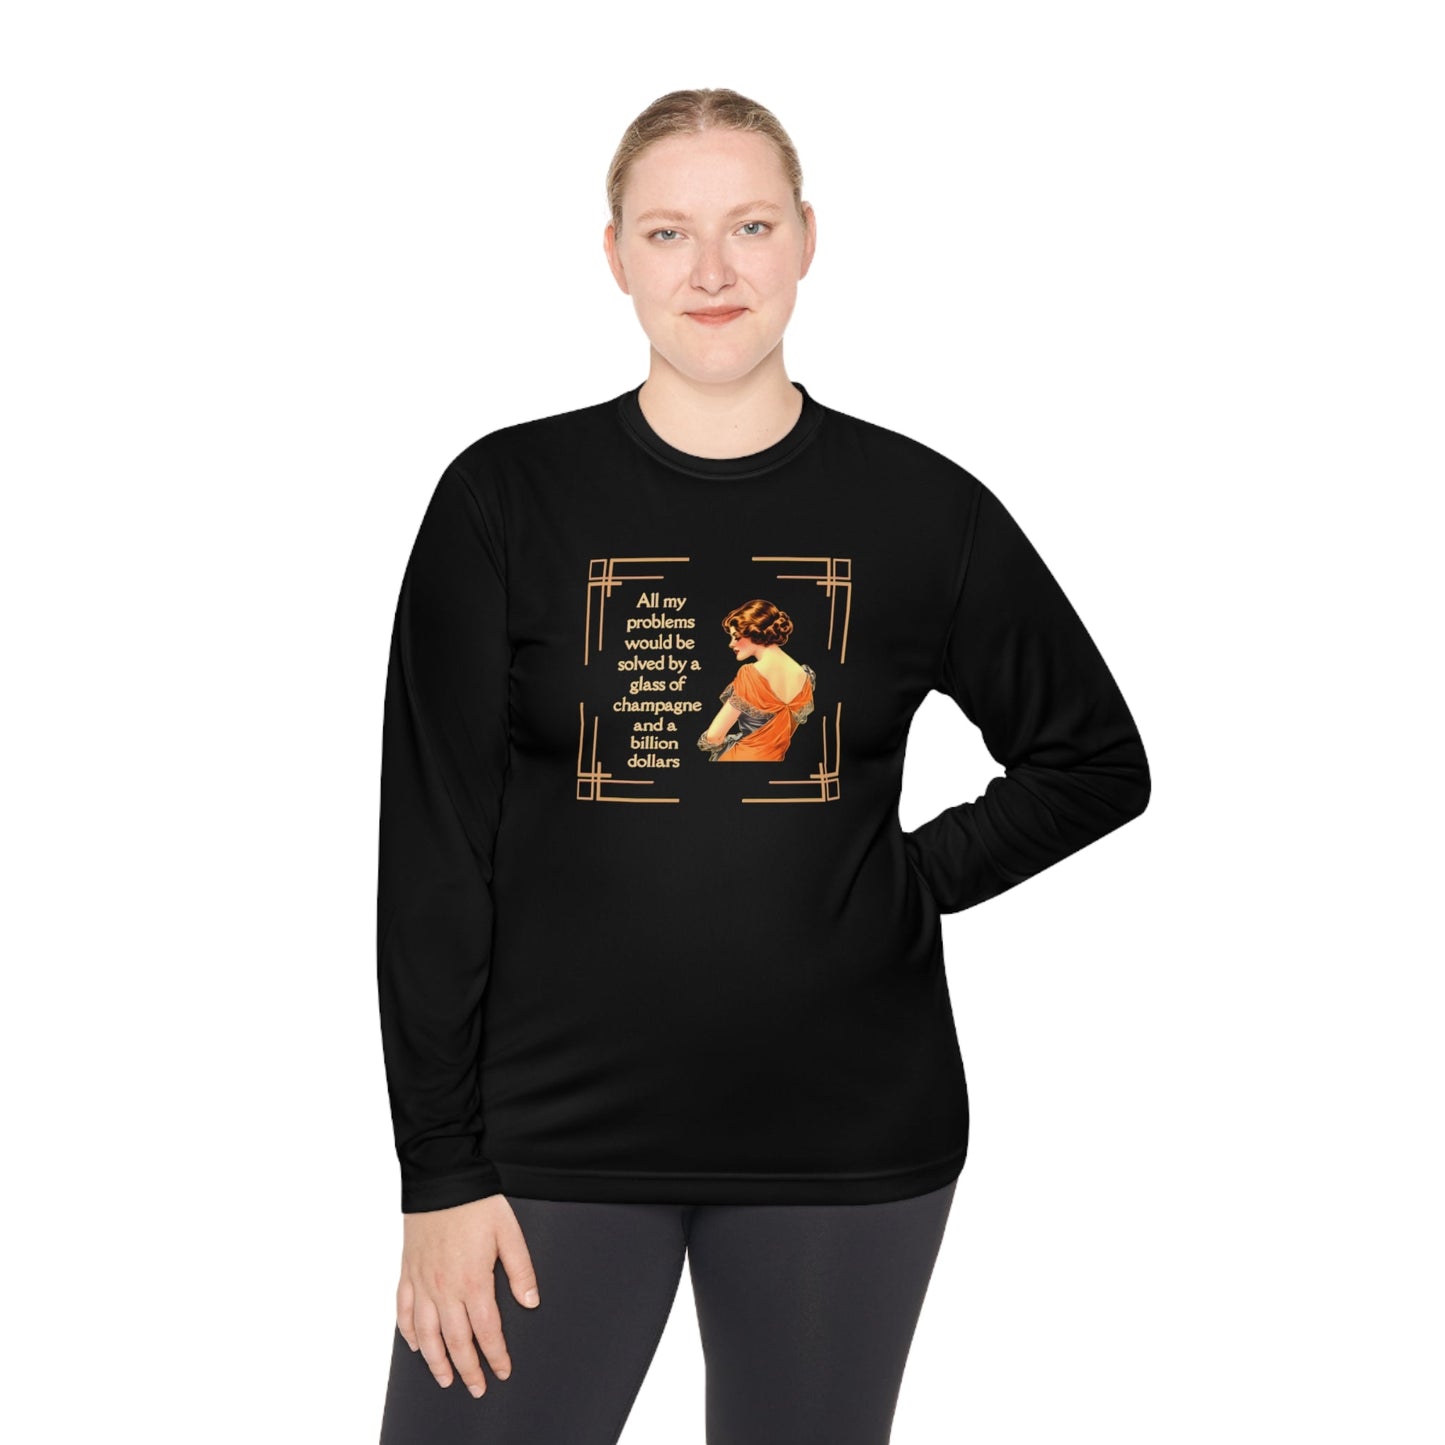 Glass of Champagne and a Billion Dollars Unisex Lightweight Long Sleeve Tee (Sizes through 4X)